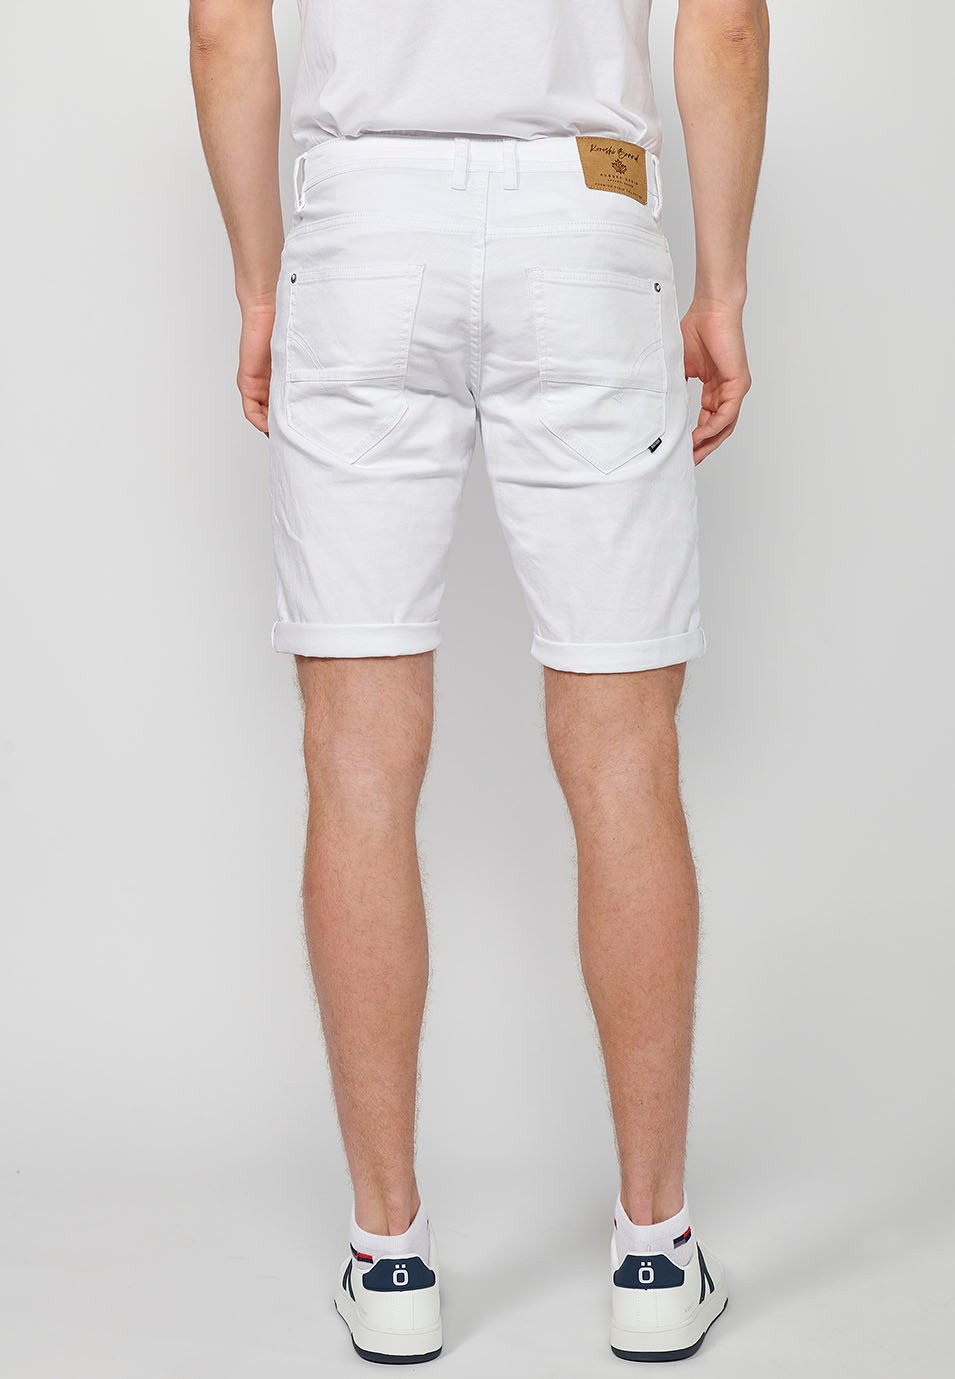 Denim Bermuda shorts with cuffed finish and front zipper and button closure. Five pockets, one match pocket, White for Men 1